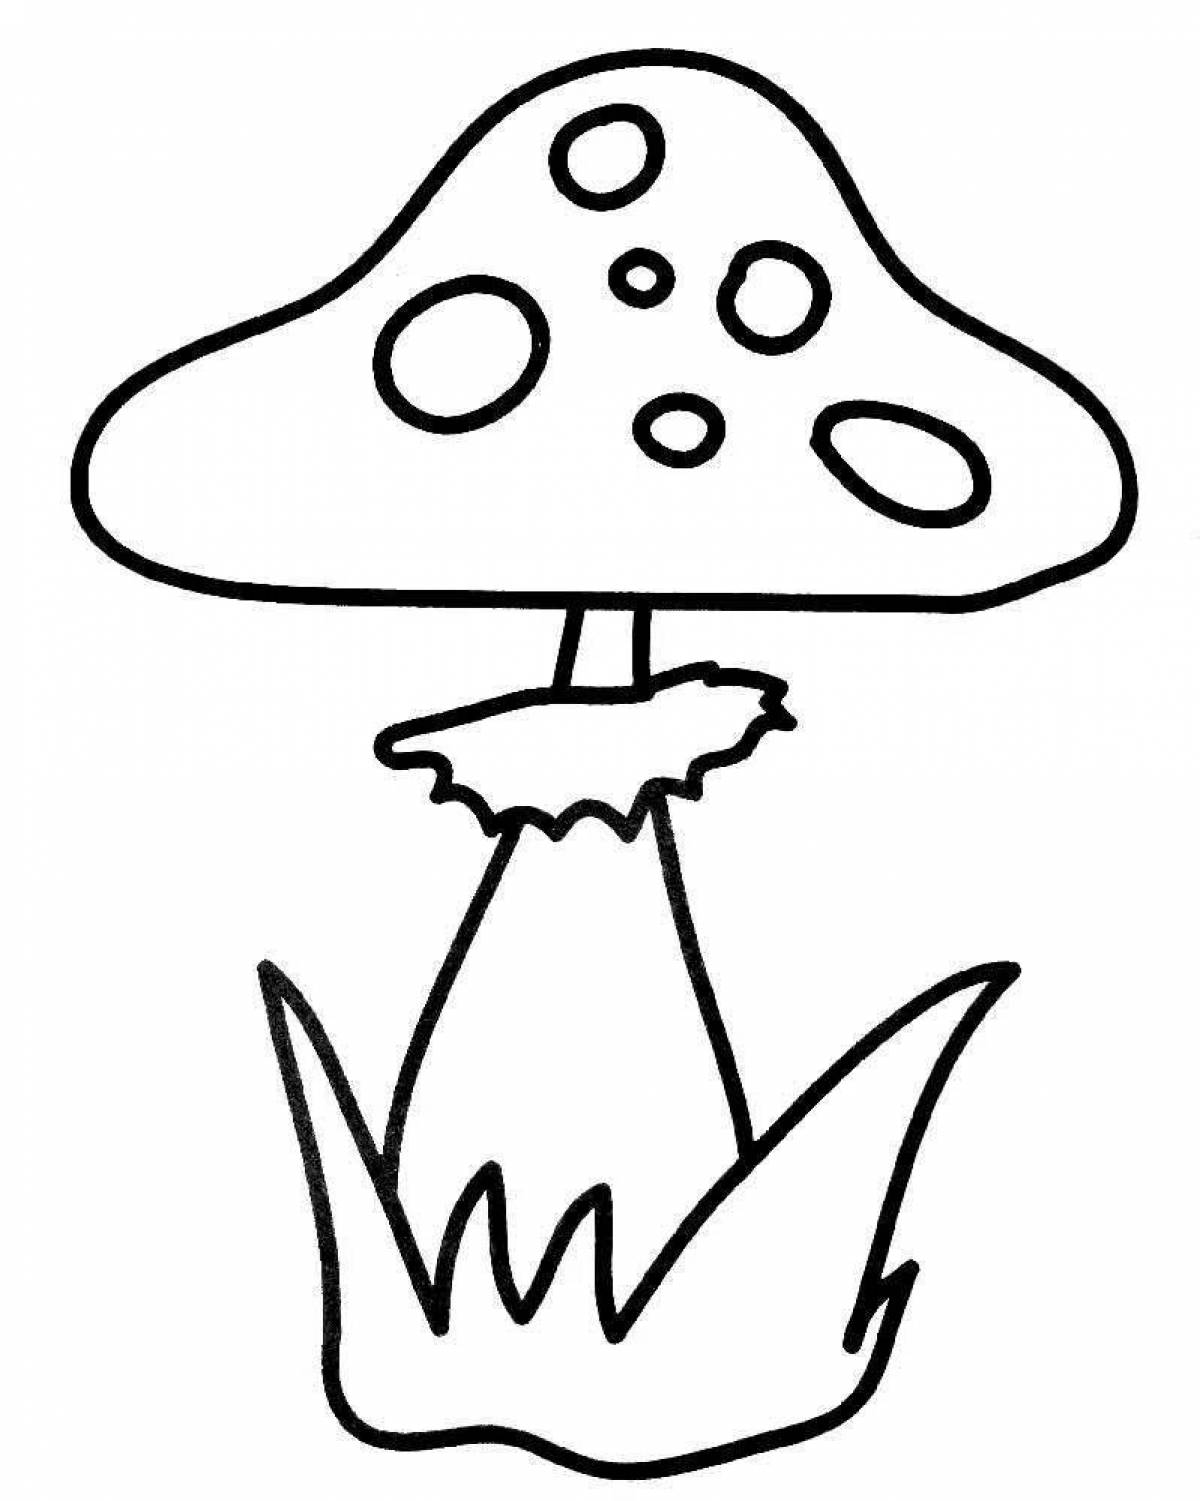 Awesome mushroom coloring pages for 3-4 year olds